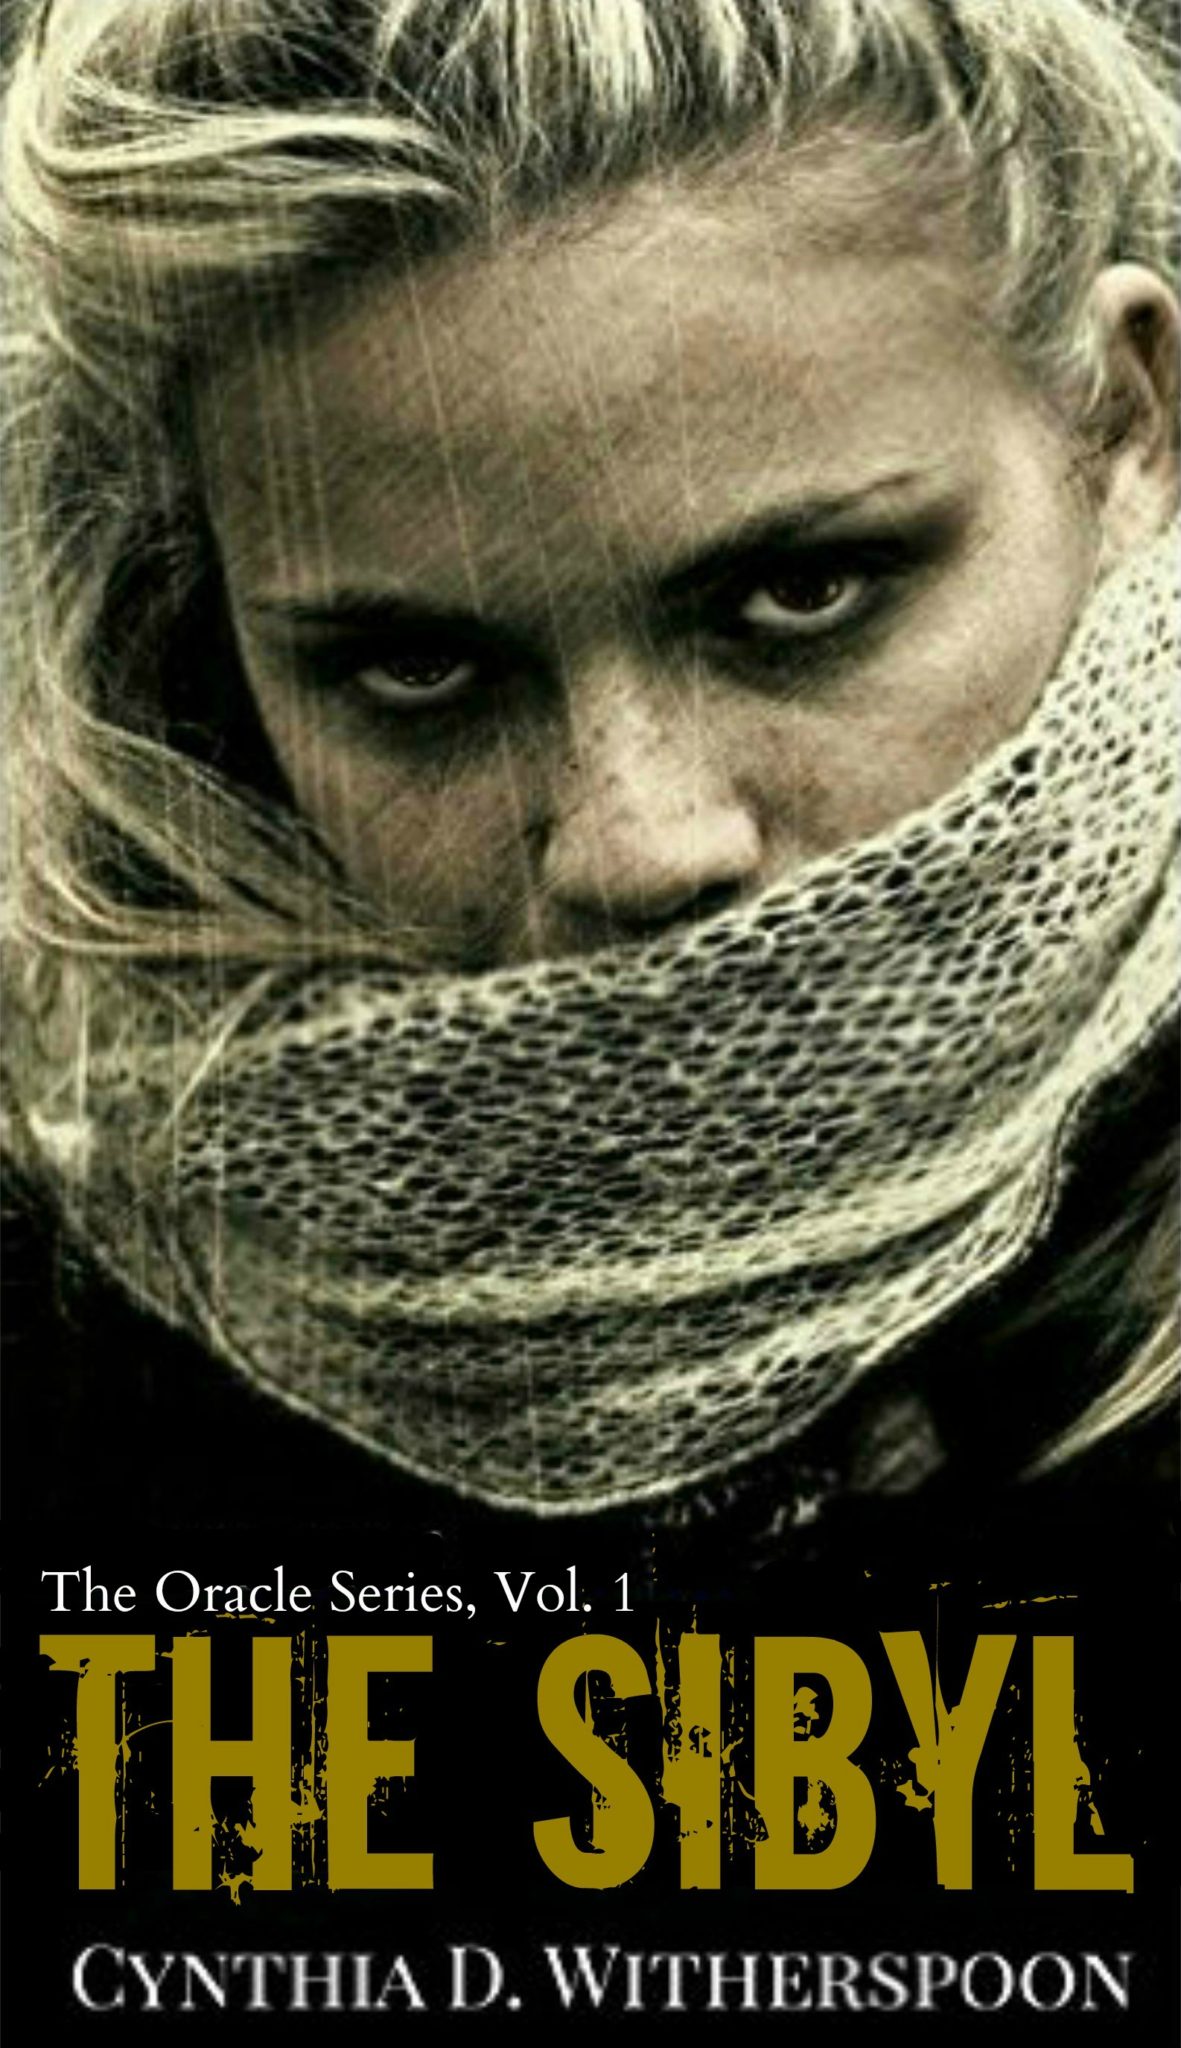 FREE: The Oracle Series Vol. 1: The Sibyl by Cynthia D. Witherspoon